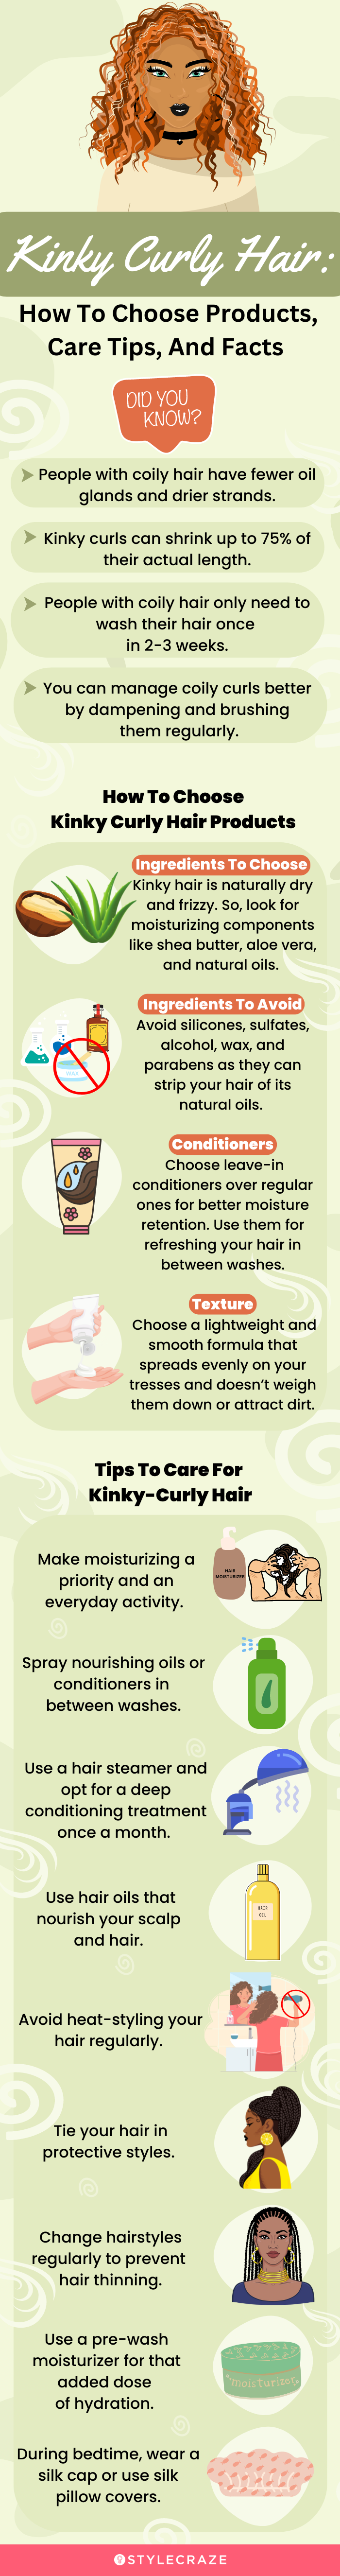 Kinky Curly Hair: How To Choose Products, Care Tips, And Facts (infographic)